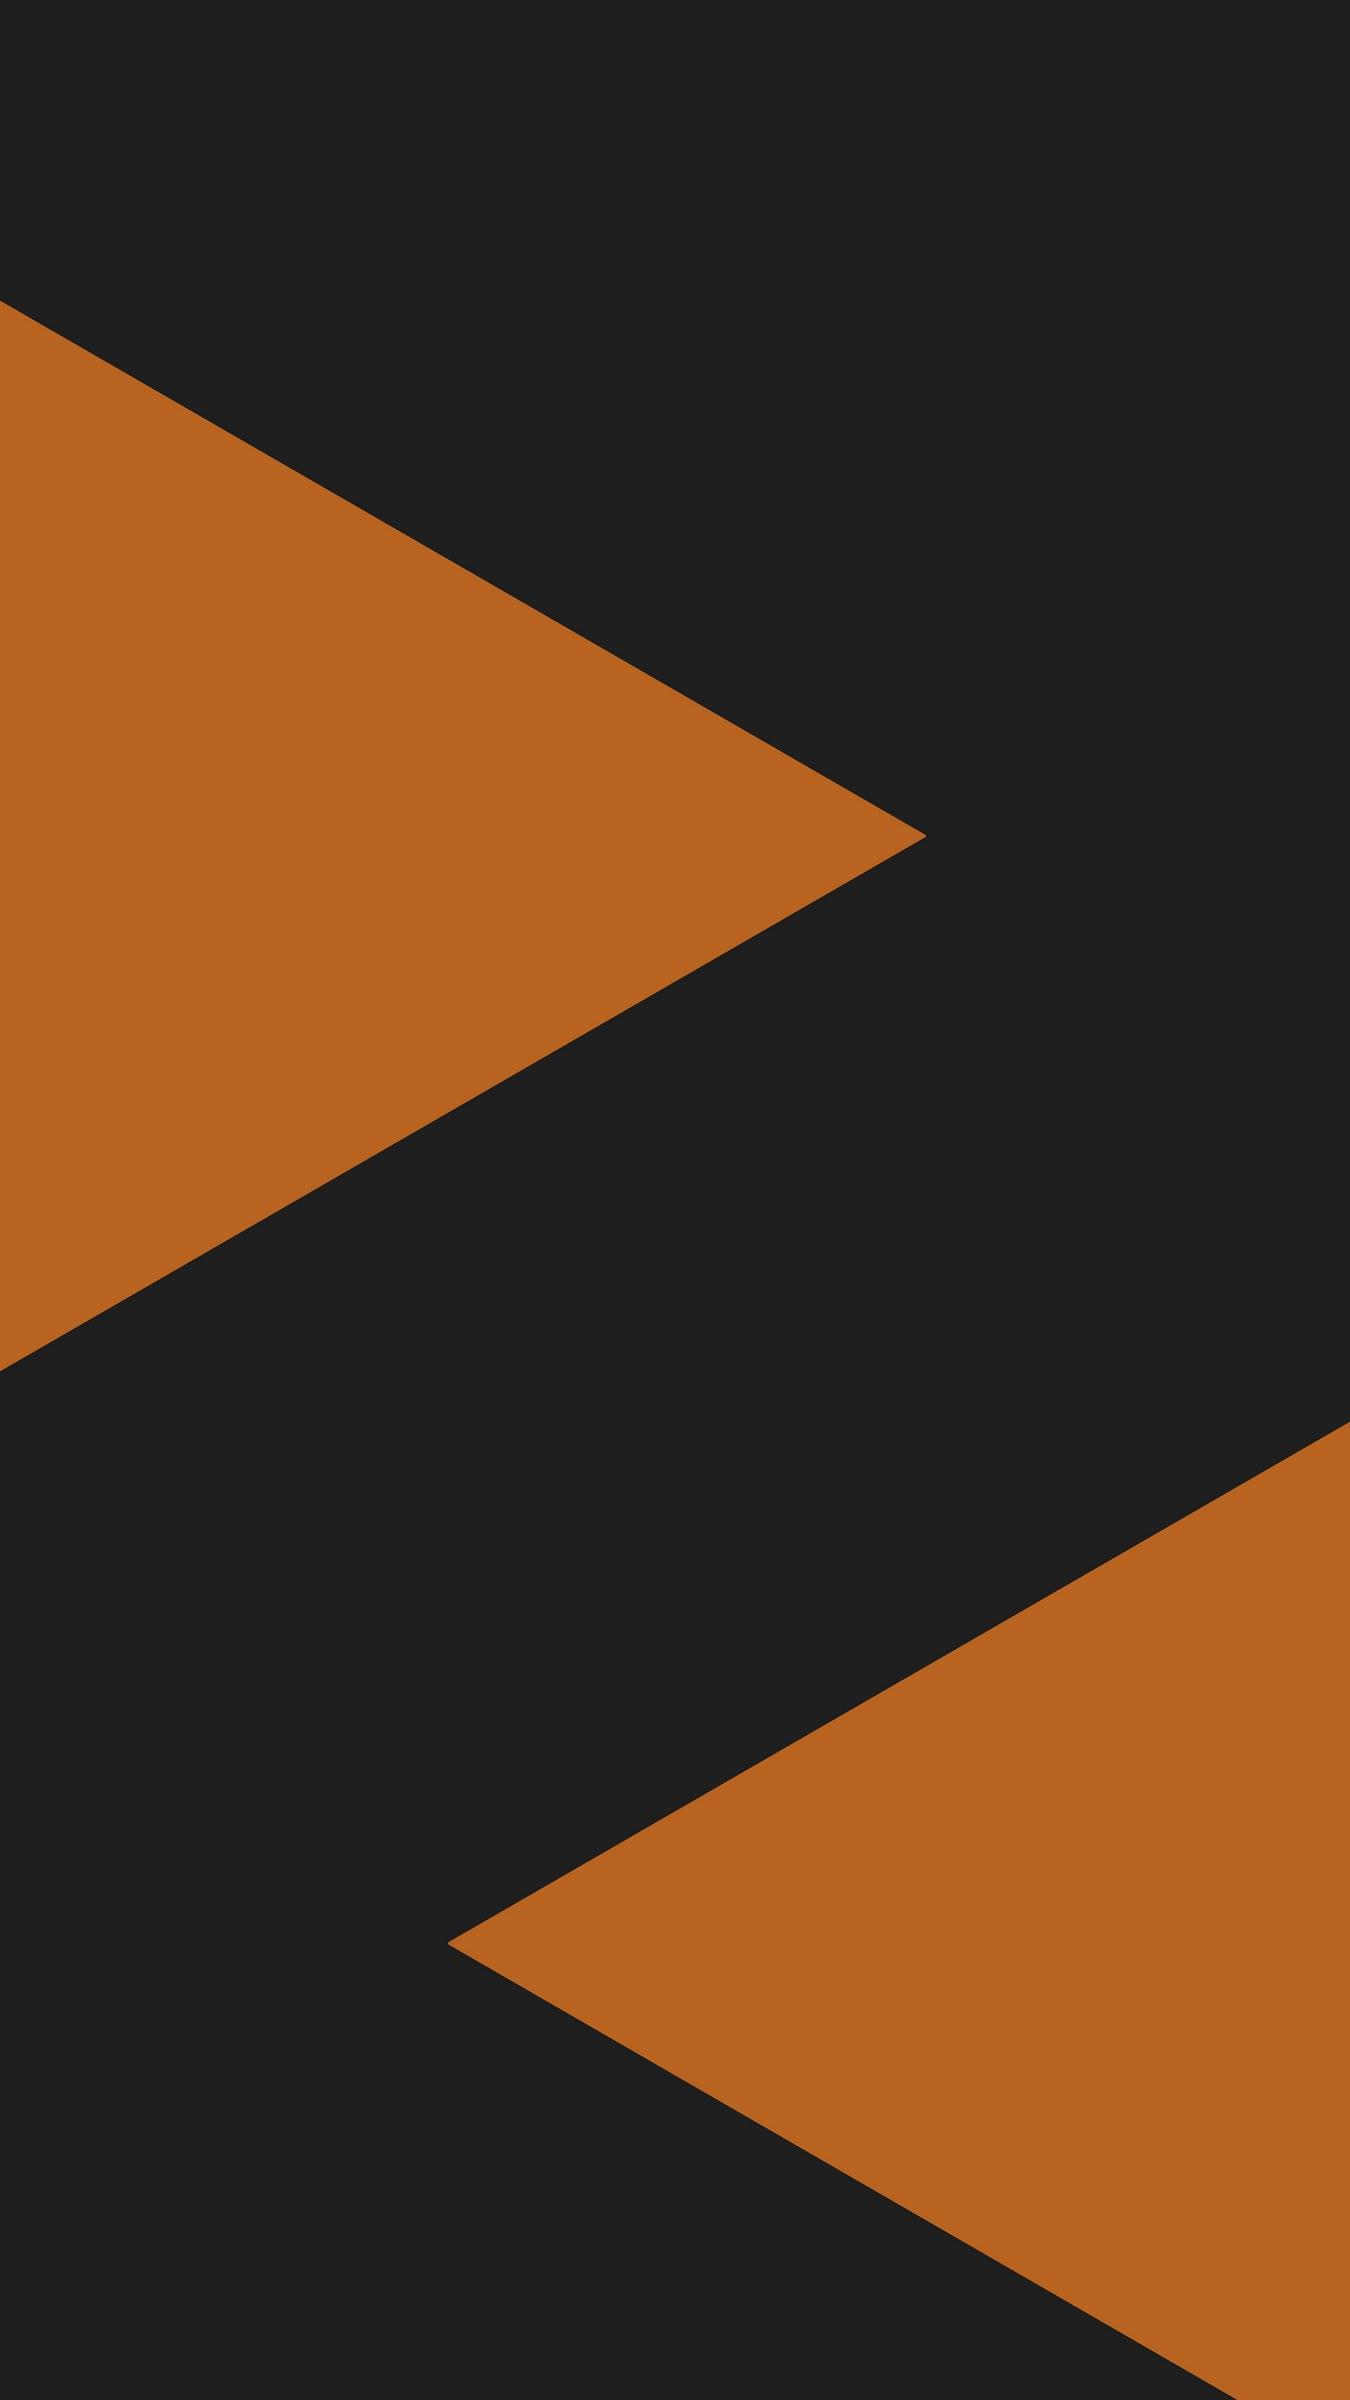 An abstract image with two orange triangles on a black background - Dark orange